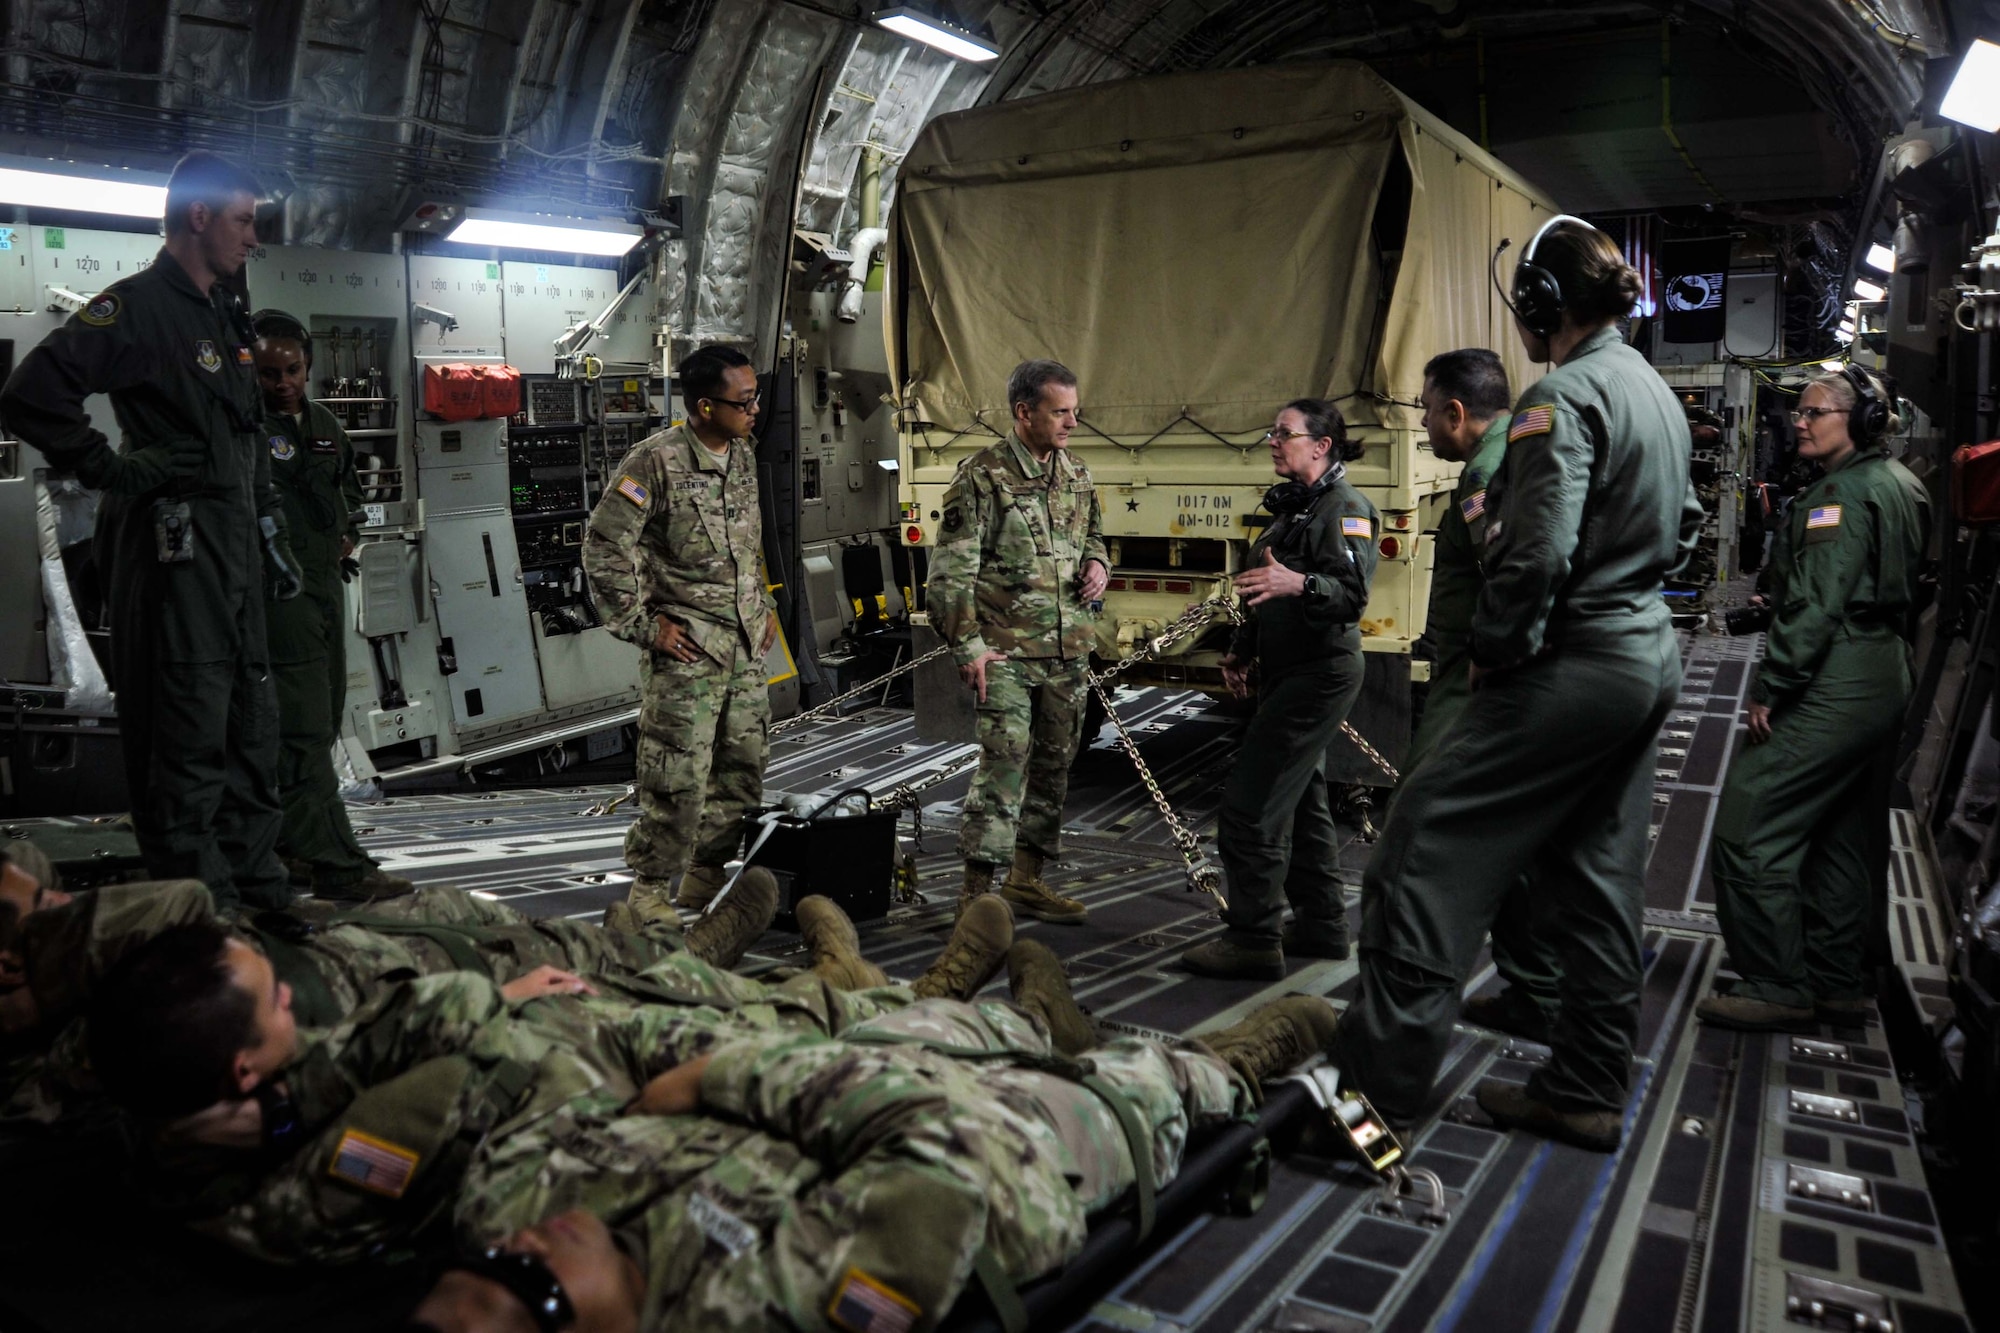 U.S. Air Force Maj. Gen. Randall A. Ogden, Fourth Air Force commanding officer, center, learns about the aeromedical evacuation mission from airmen assigned to the 452nd Aeromedical Evacuation Squadron, March Air Reserve Base, aboard a C-17 Globemaster III during exercise Patriot Hook, April 14, 2019, Naval Air Station North Island, California.